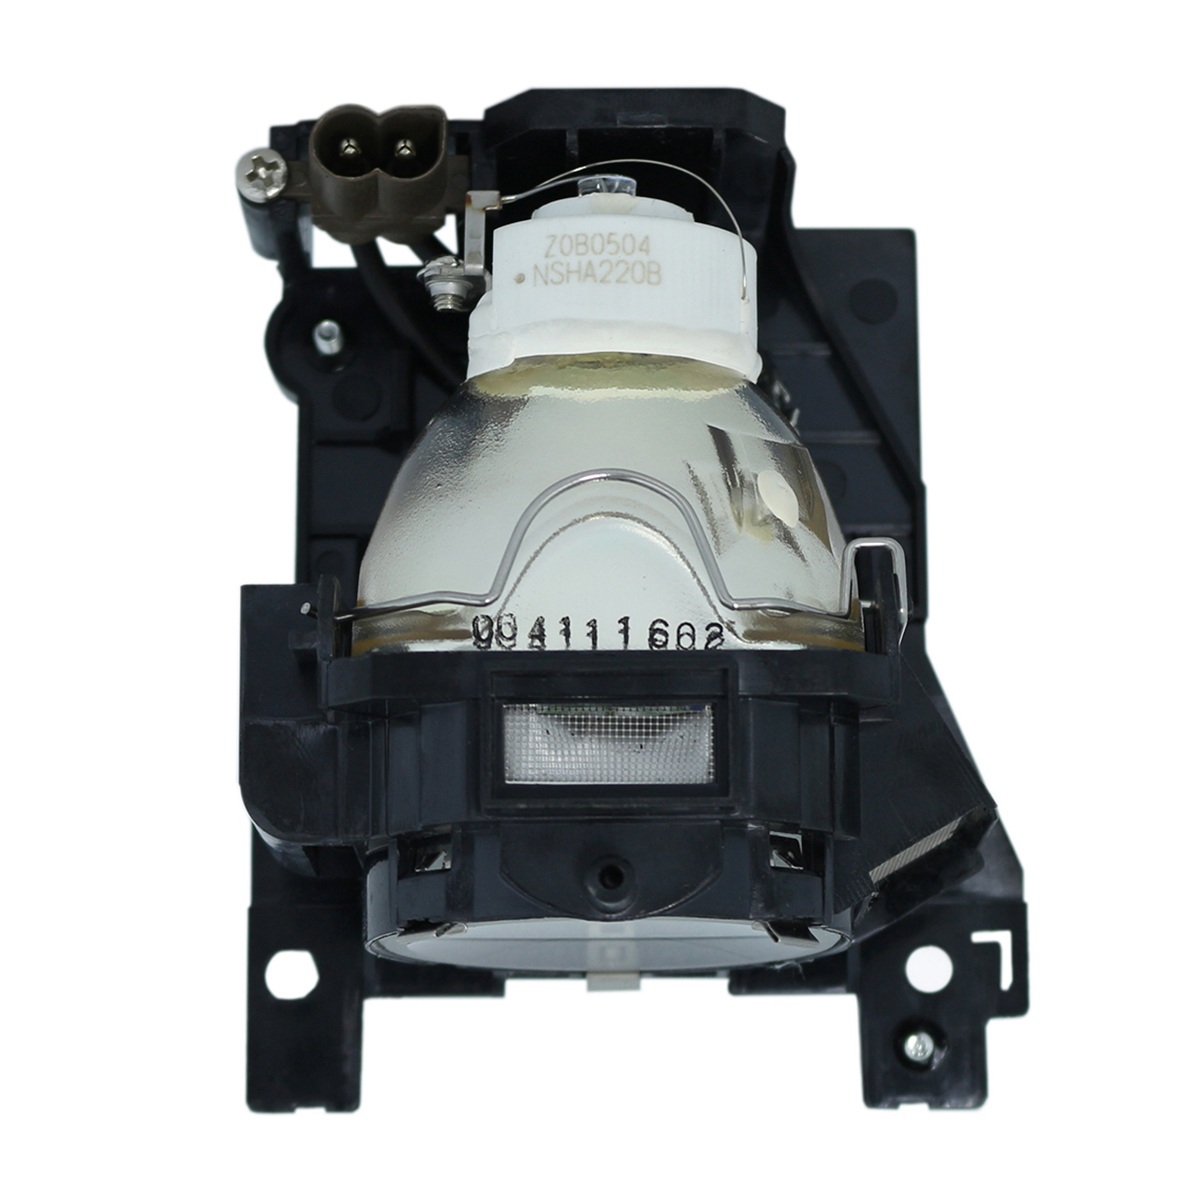 DT00891 Replacement Lamp & Housing for Hitachi Projectors - image 4 of 6